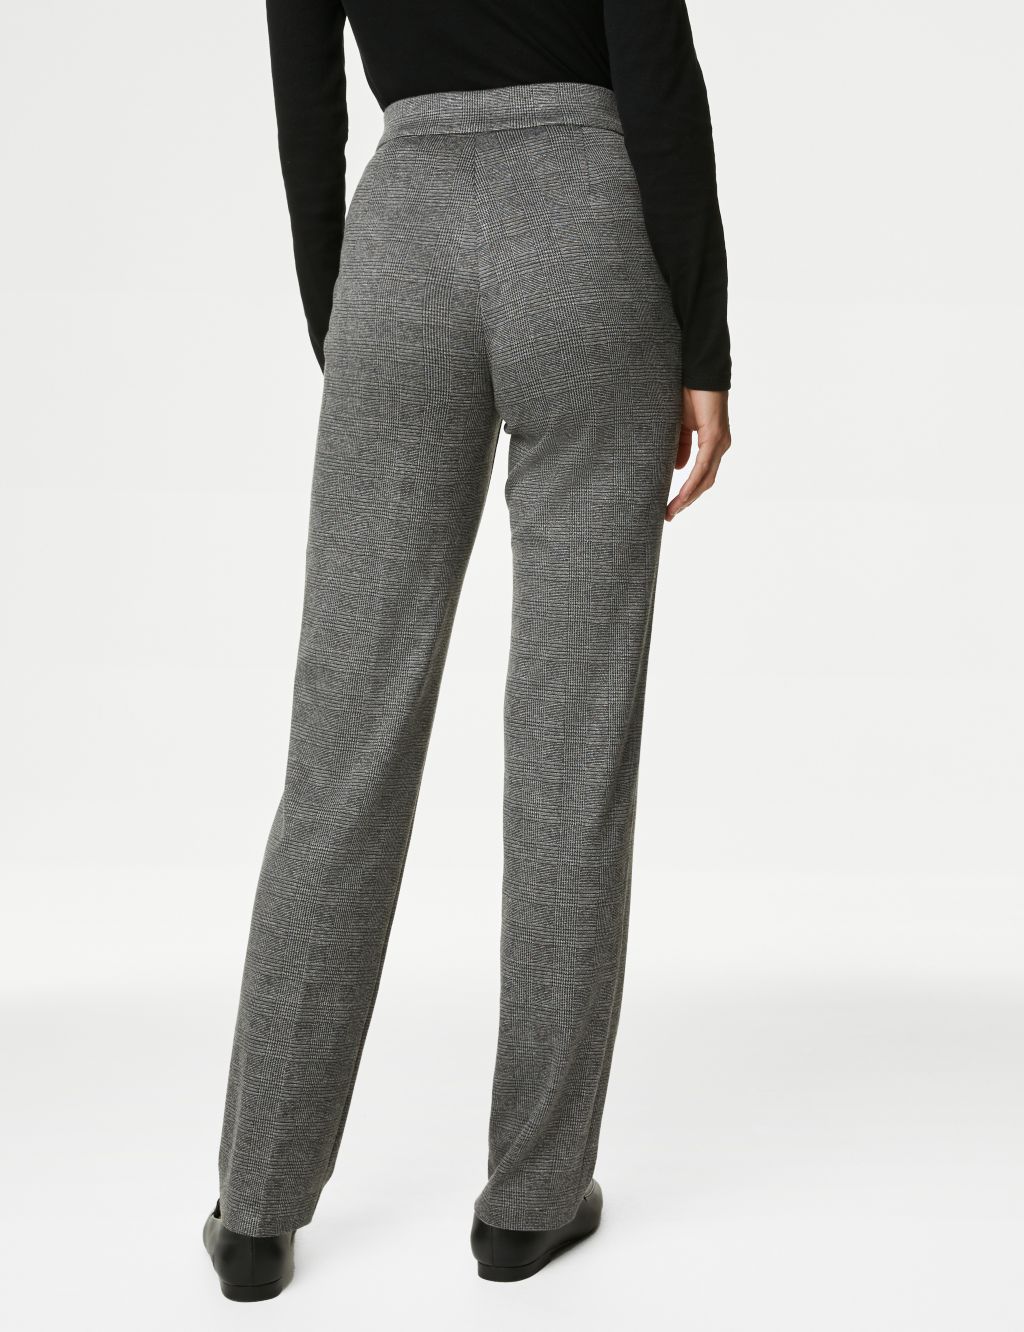 Jersey Checked Straight Leg Trousers image 5